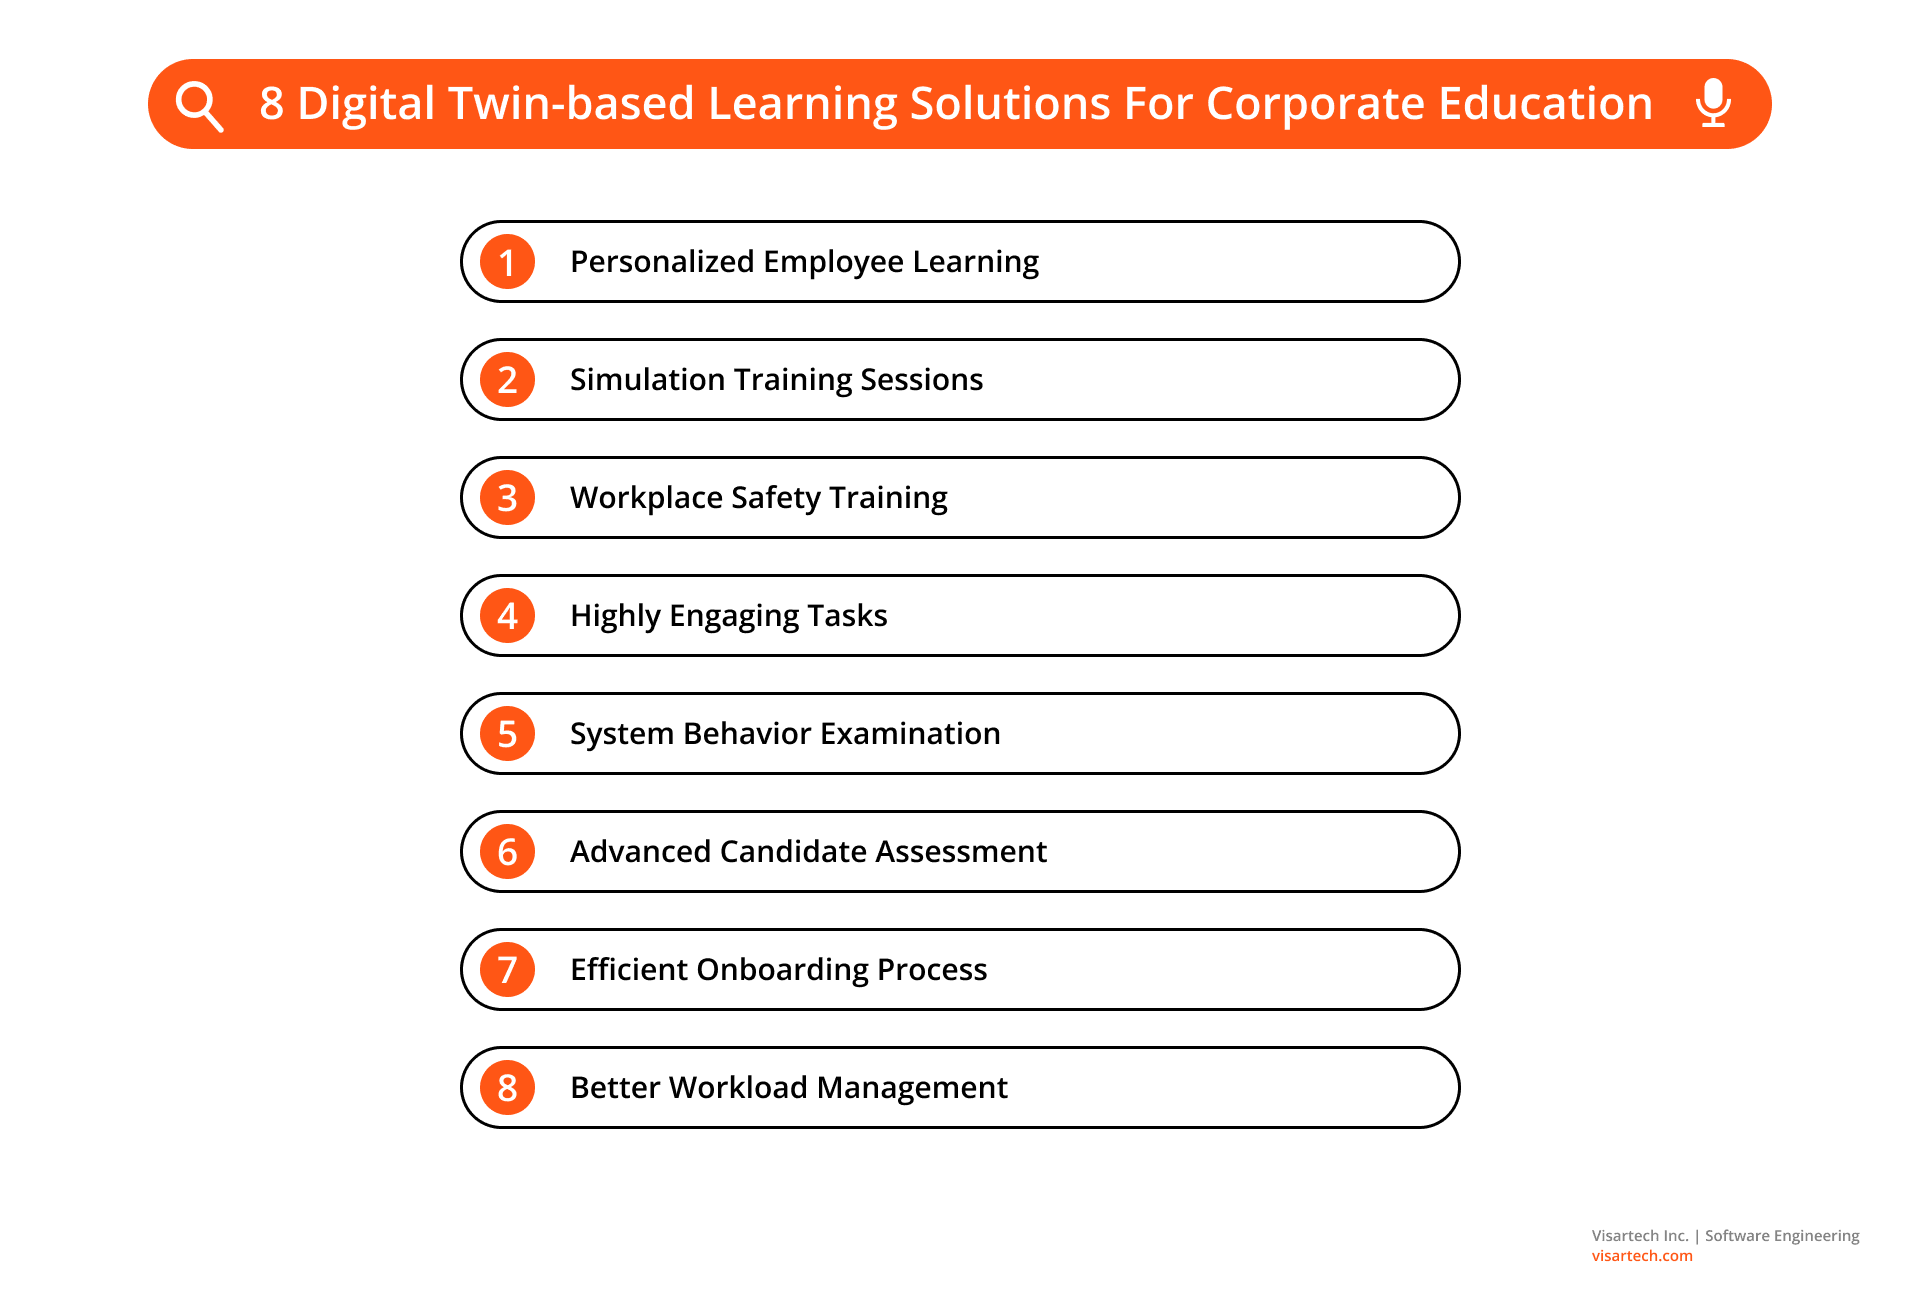 The Solutions Companies Get of Using Digital Twins  for Corporate Education - Visartech Blog